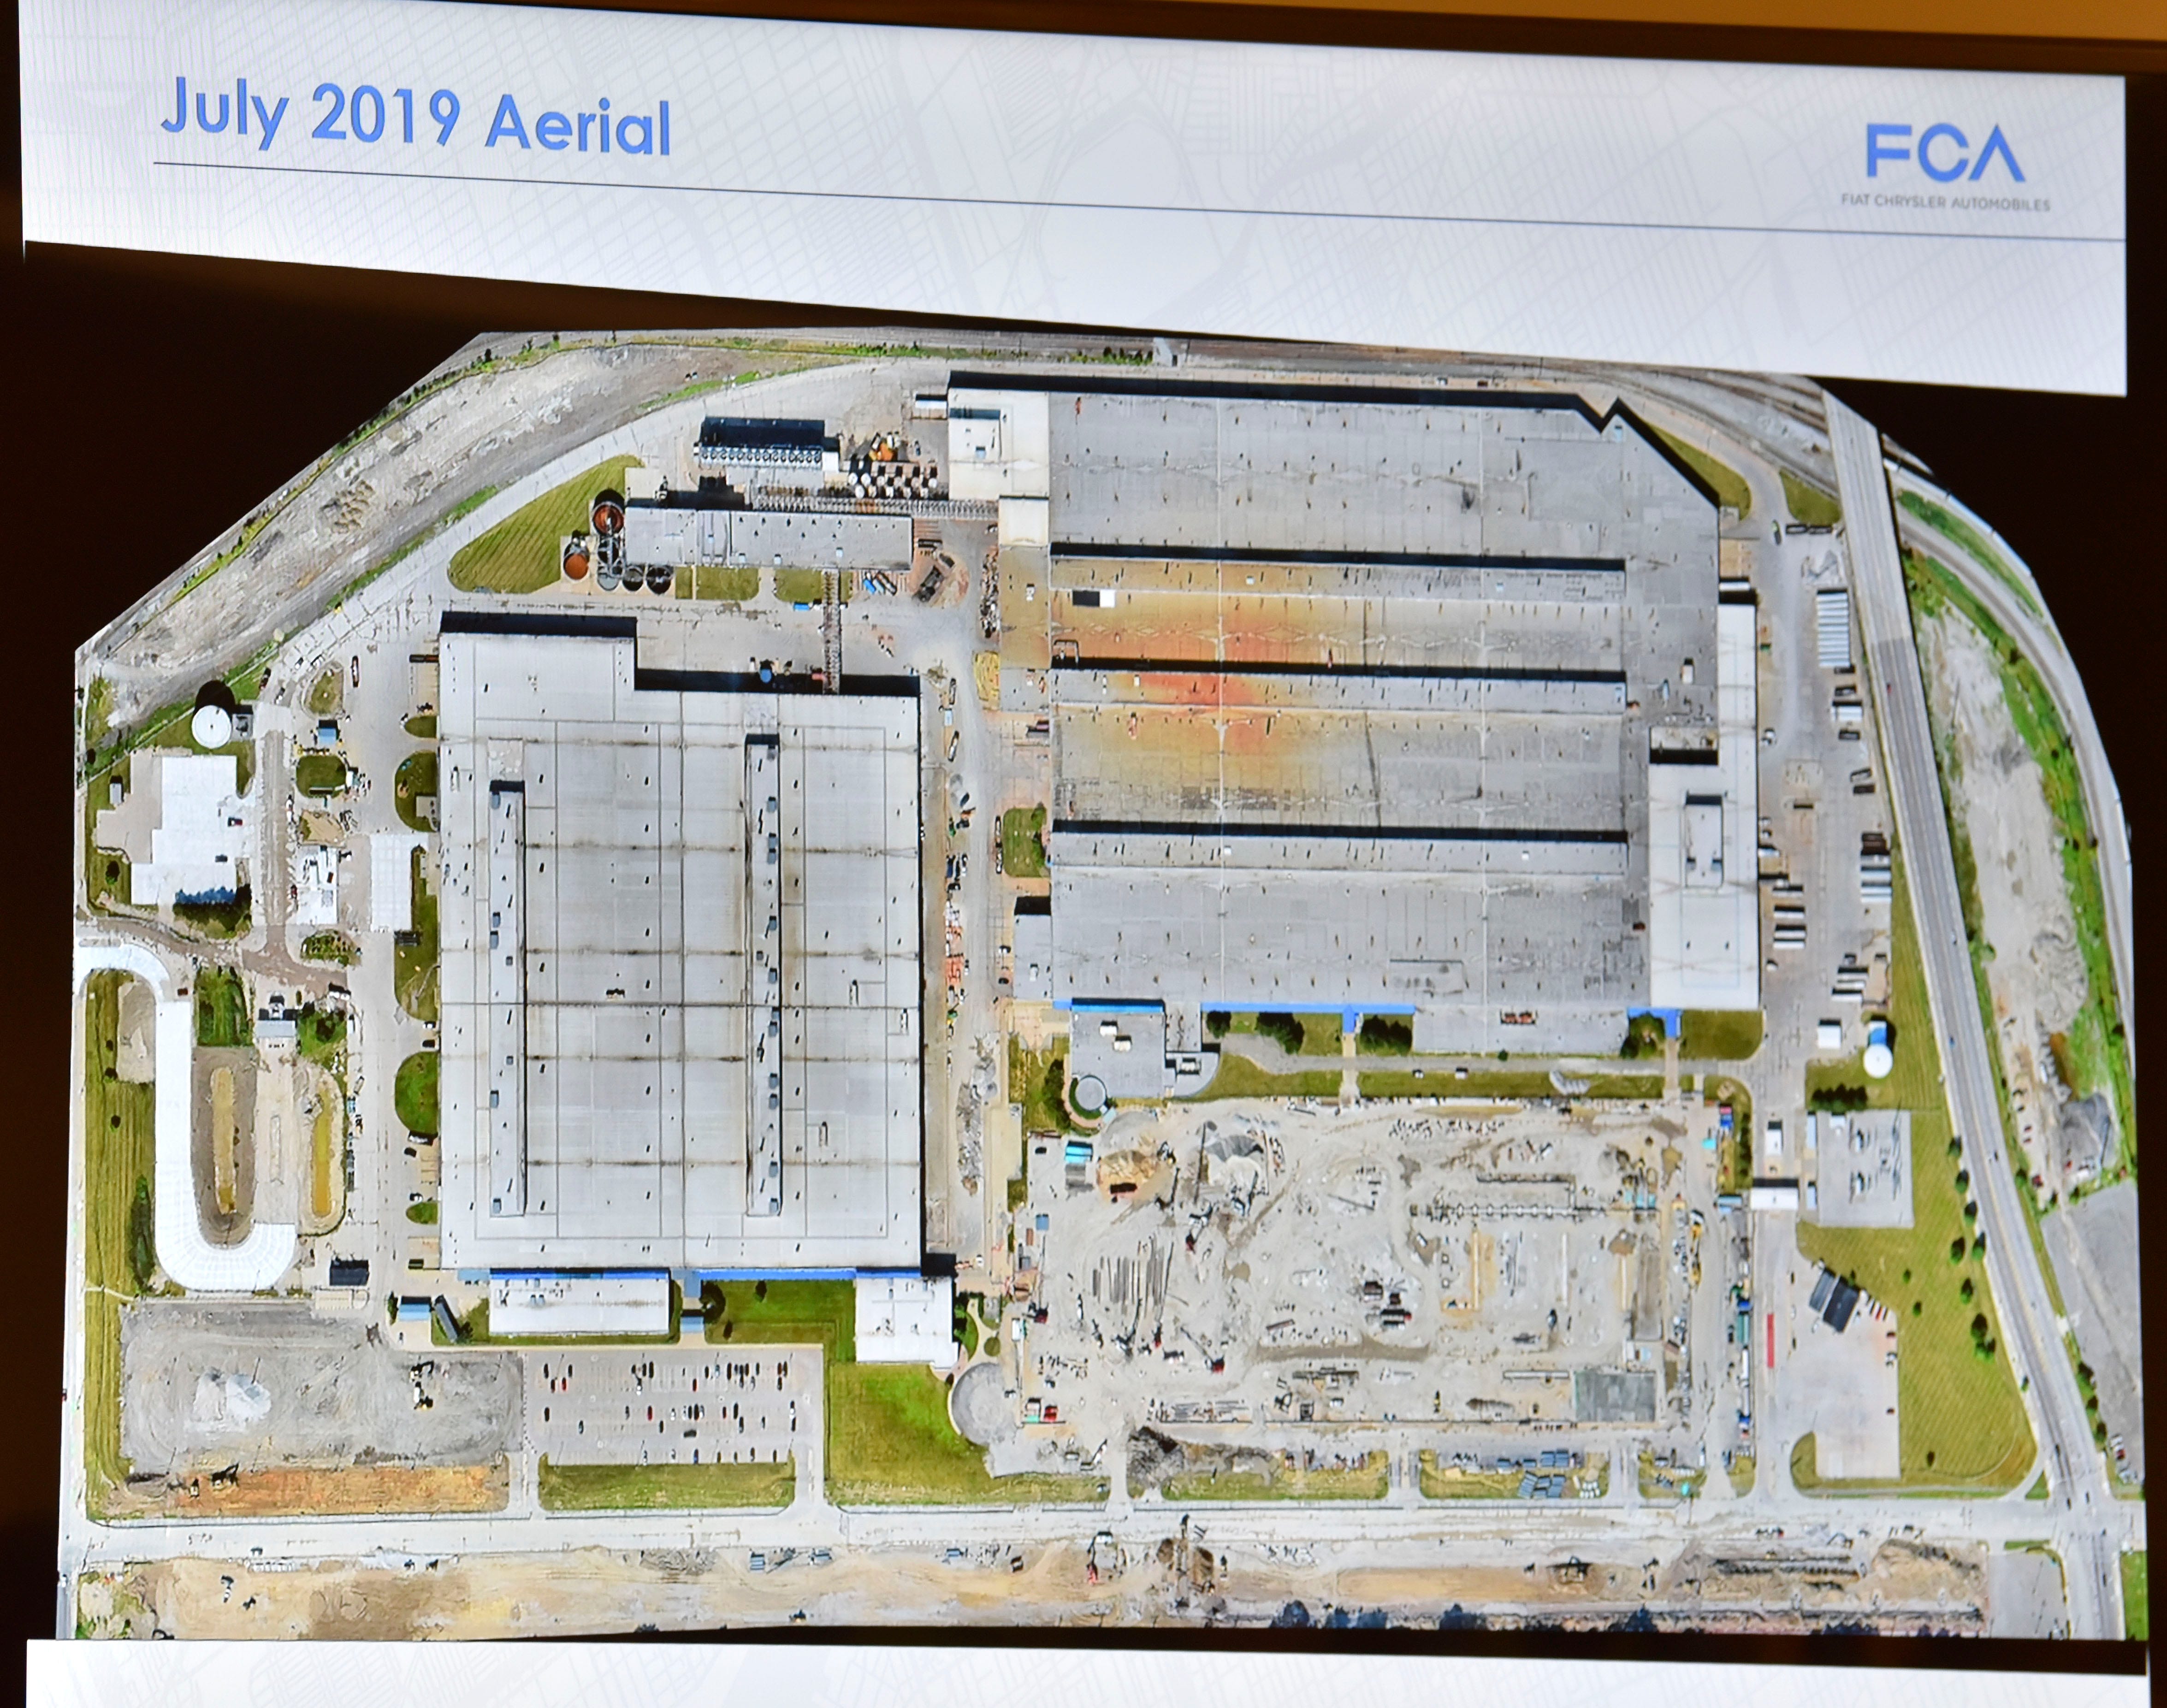 This is a July 2019 aerial view of the construction site.